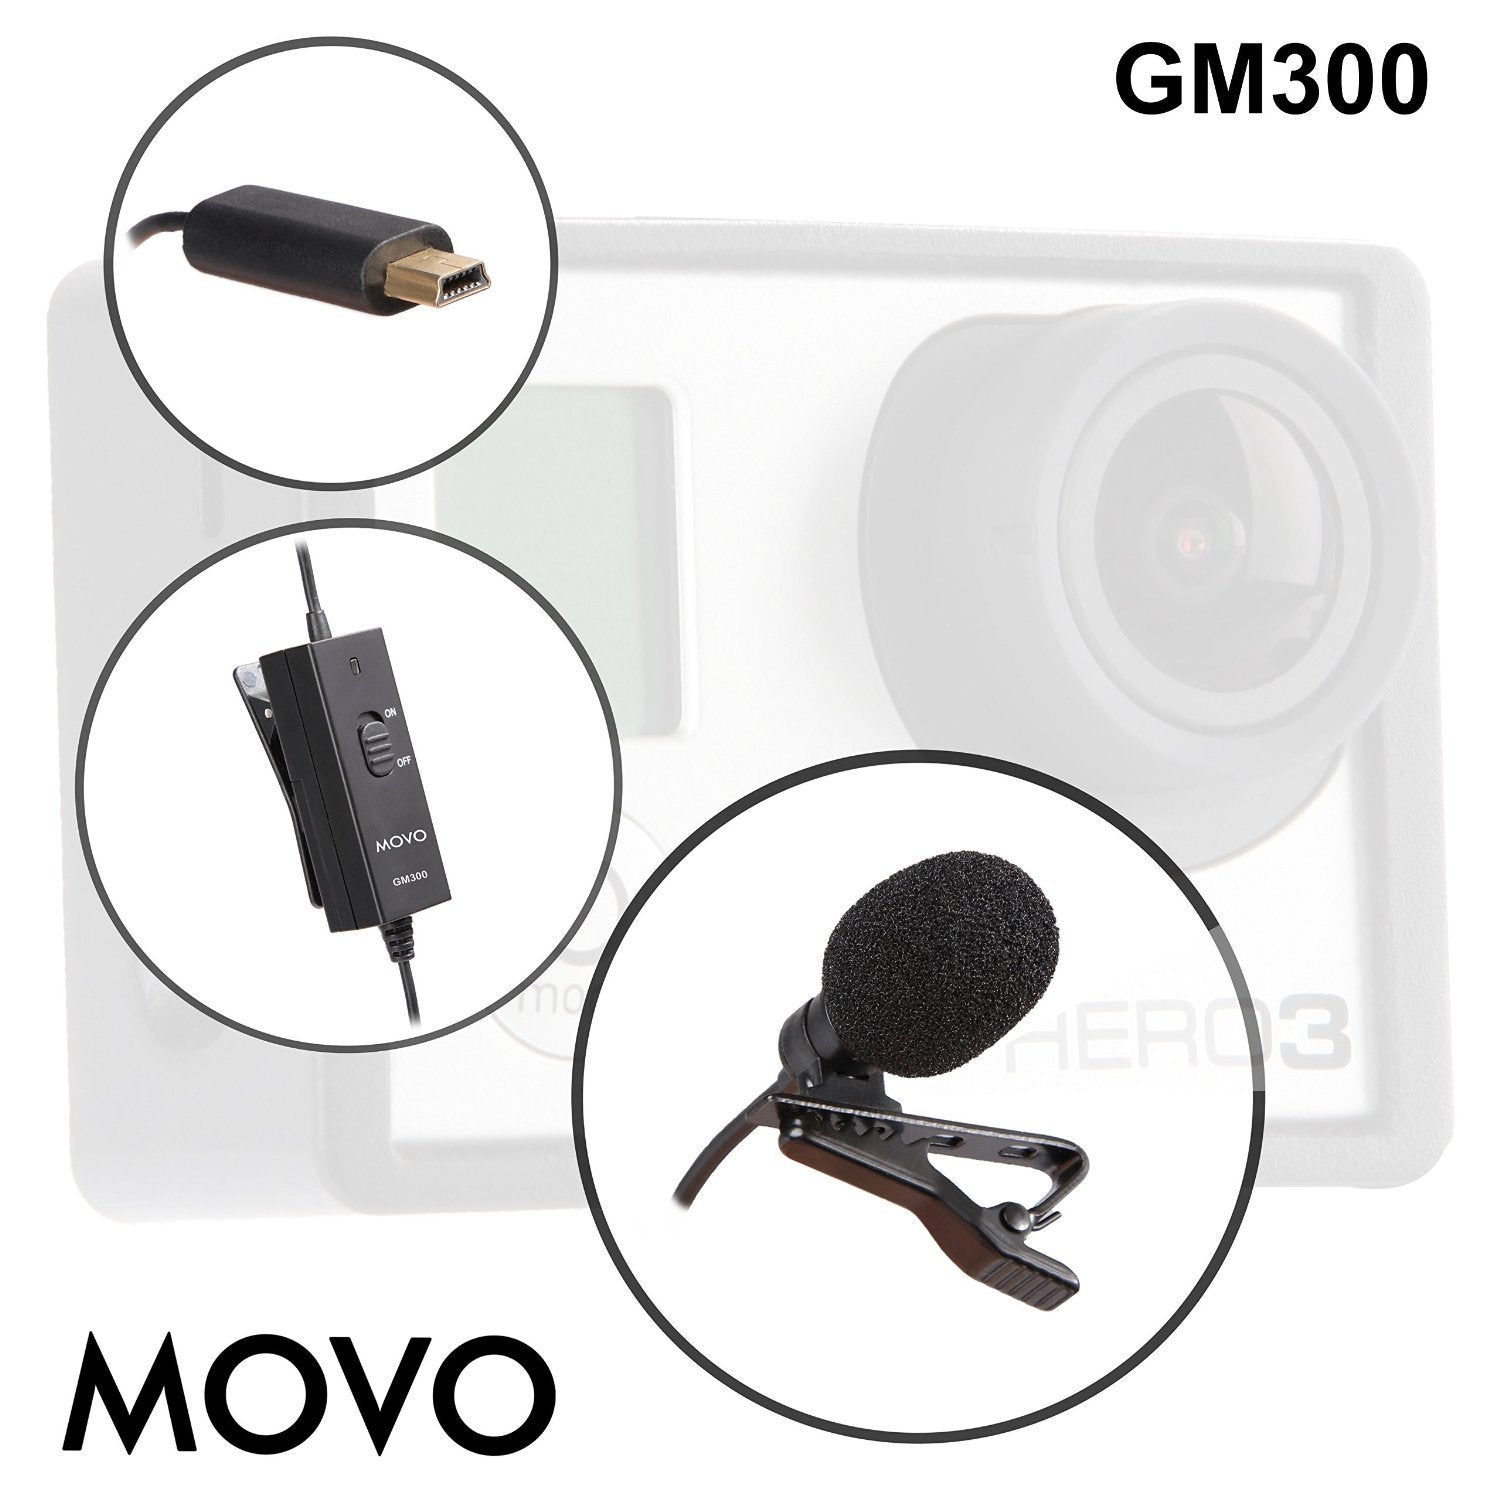 Movo GM300 Lavalier GoPro Microphone - Omnidirectional Lavalier Microphone Compatible with GoPro HERO3, HERO3+ and HERO4 Black, White and Silver Editions (9-Foot Cord)  - Like New